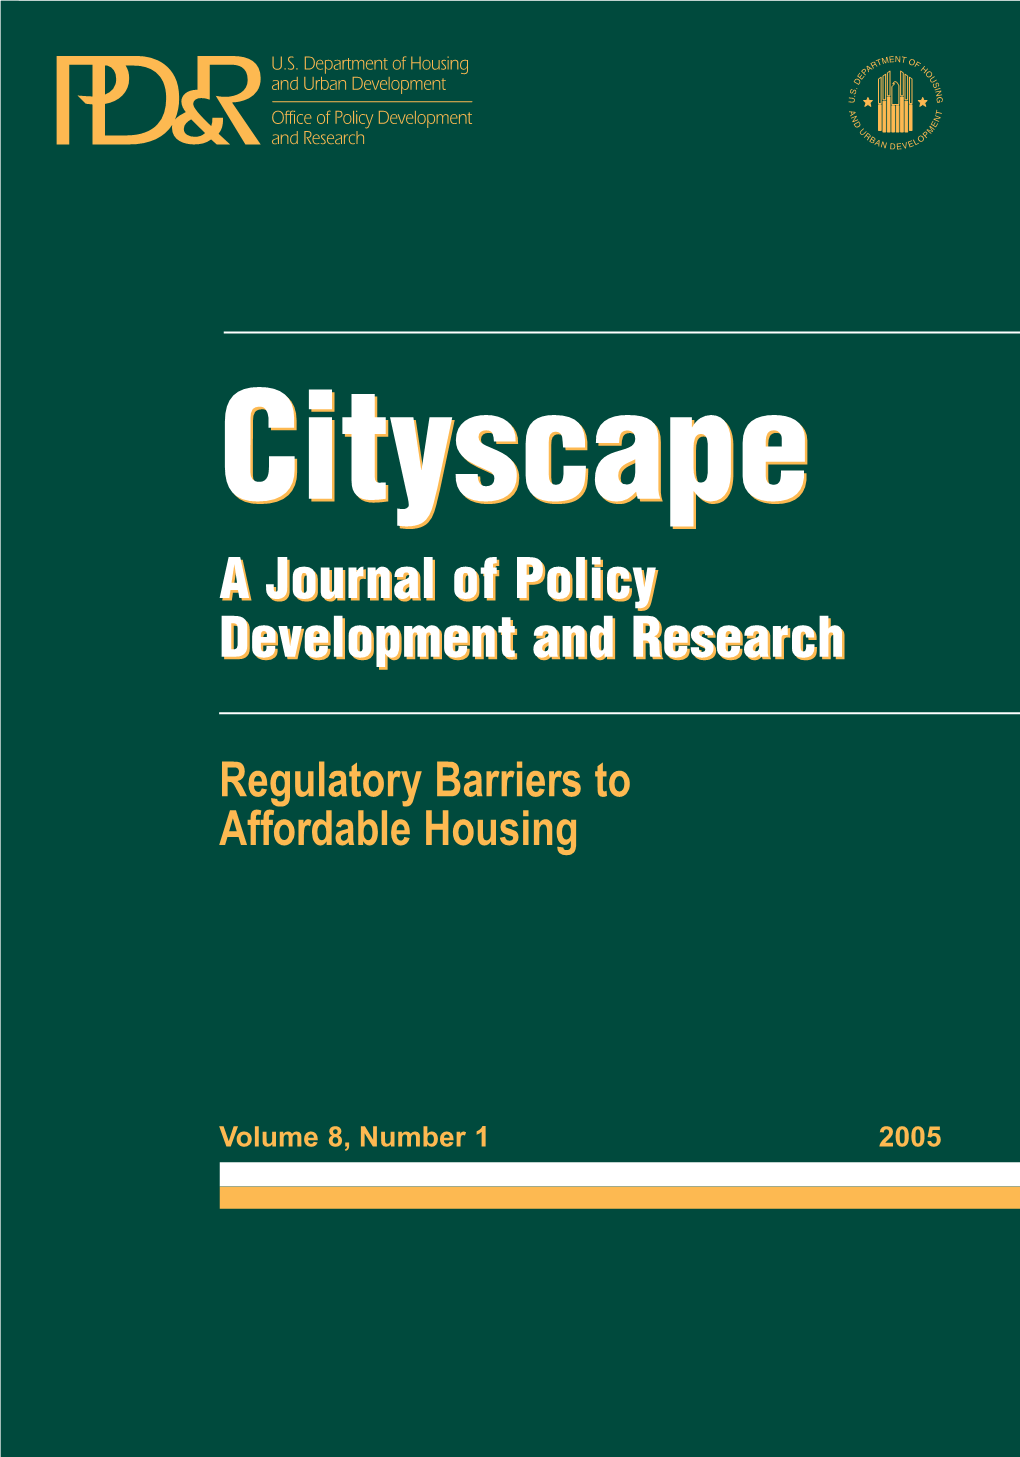 Cityscape Volume 8 Number 1 : Regulatory Barriers to Affordable